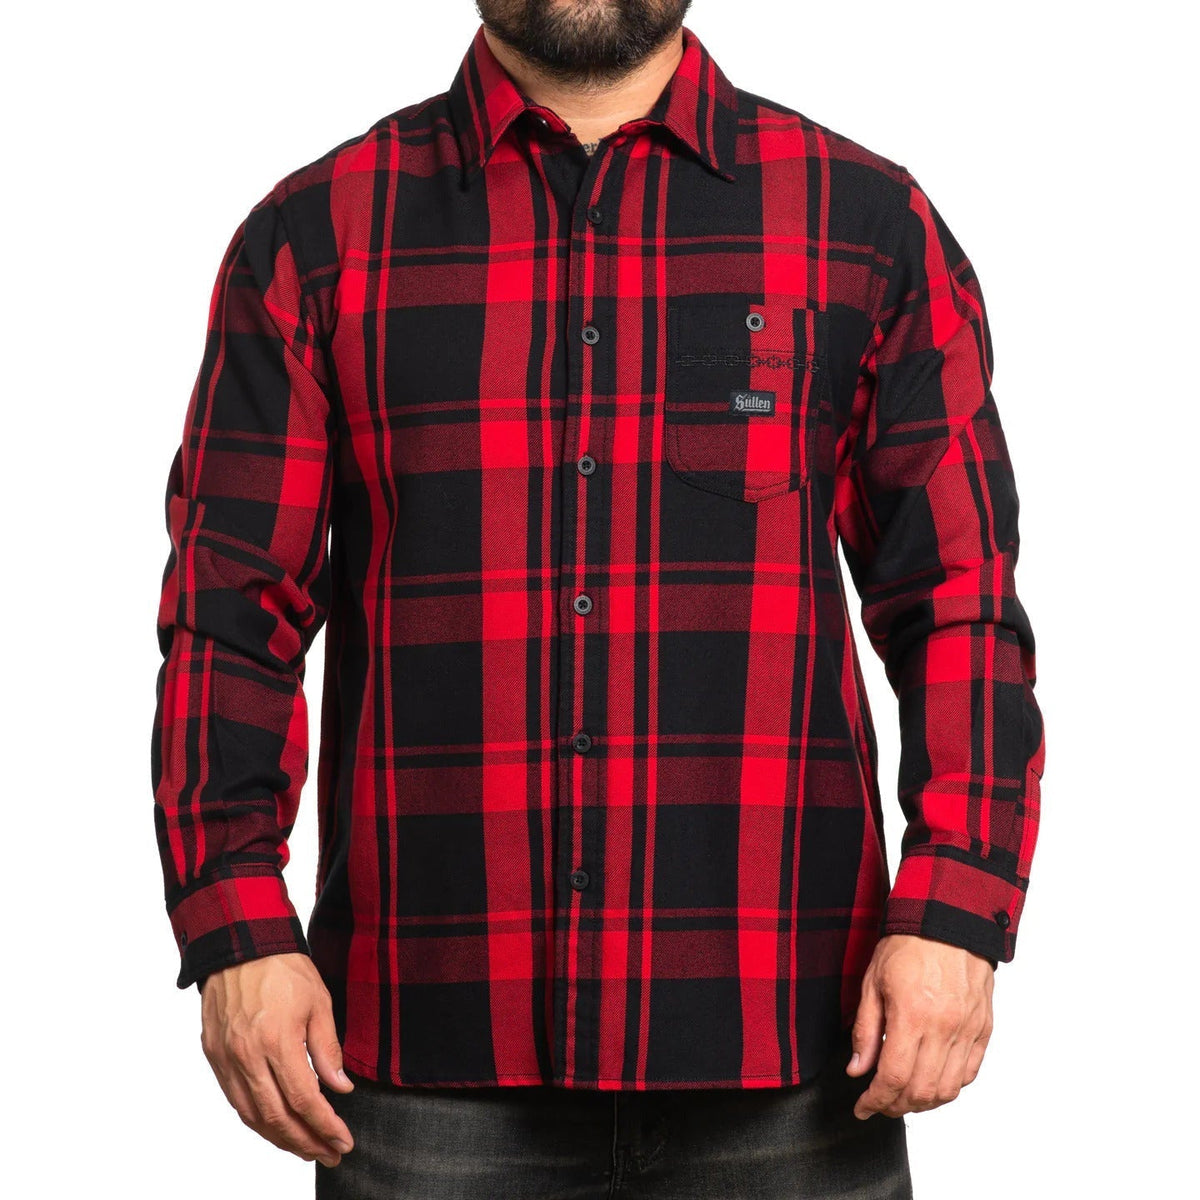 SULLEN-ART-COLLECTIVE-OVERCAST-FLANNEL - FLANNEL - Synik Clothing - synikclothing.com